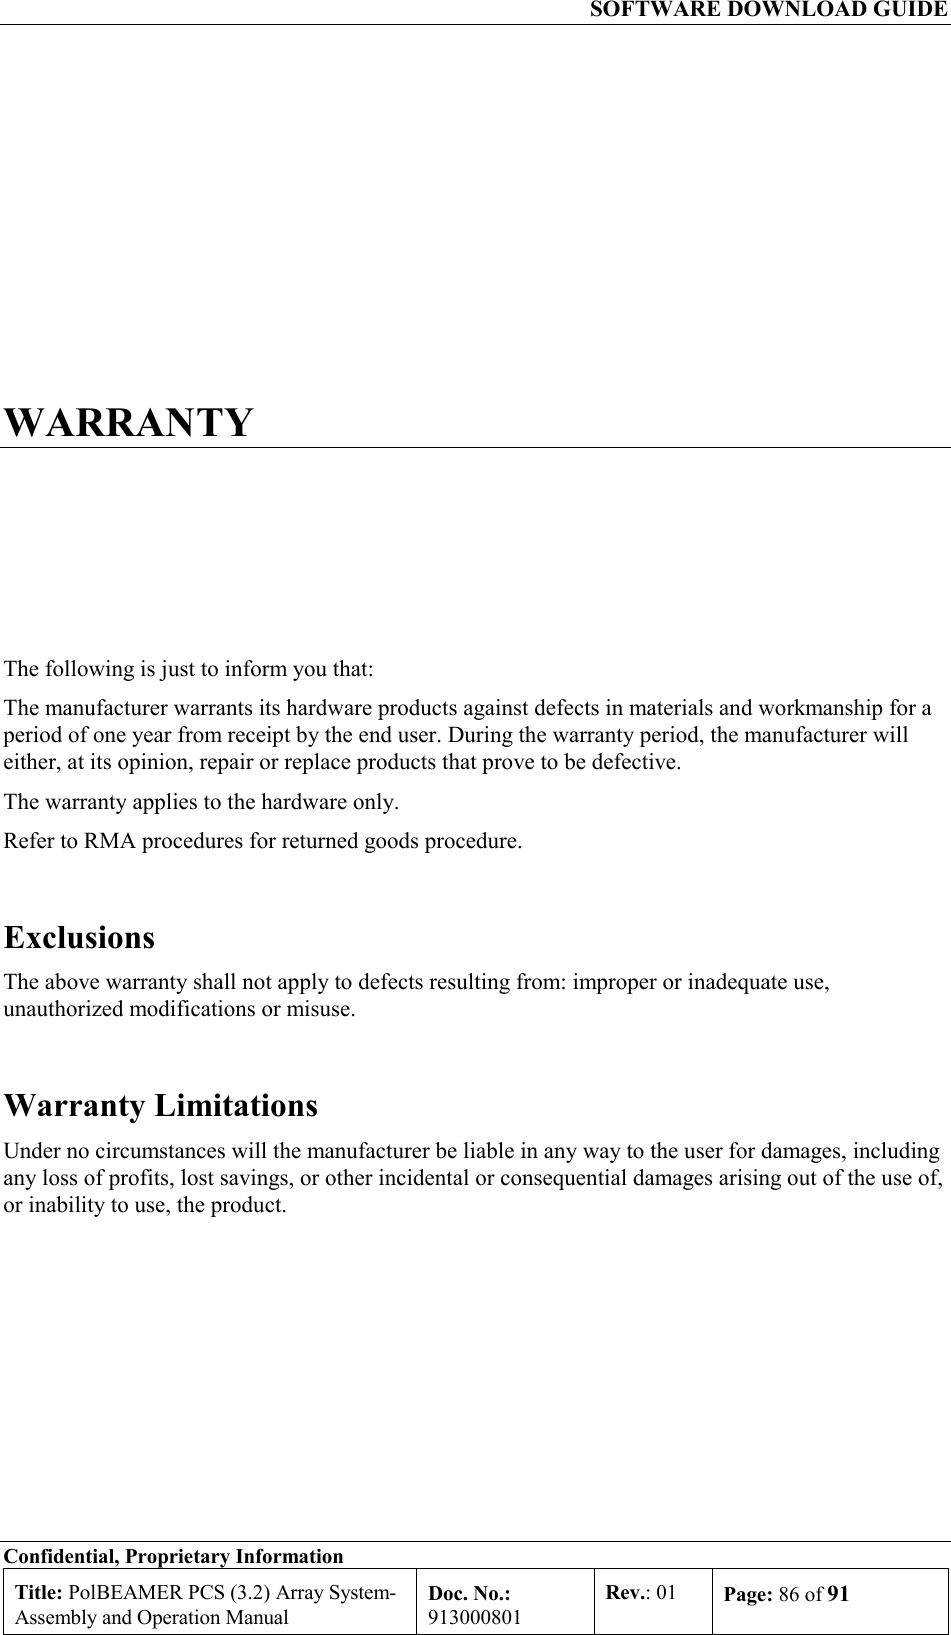   SOFTWARE DOWNLOAD GUIDE Confidential, Proprietary Information Title: PolBEAMER PCS (3.2) Array System- Assembly and Operation Manual Doc. No.: 913000801 Rev.: 01  Page: 86 of 91  WARRANTY The following is just to inform you that: The manufacturer warrants its hardware products against defects in materials and workmanship for a period of one year from receipt by the end user. During the warranty period, the manufacturer will either, at its opinion, repair or replace products that prove to be defective. The warranty applies to the hardware only. Refer to RMA procedures for returned goods procedure.  Exclusions The above warranty shall not apply to defects resulting from: improper or inadequate use, unauthorized modifications or misuse. Warranty Limitations Under no circumstances will the manufacturer be liable in any way to the user for damages, including any loss of profits, lost savings, or other incidental or consequential damages arising out of the use of, or inability to use, the product. 